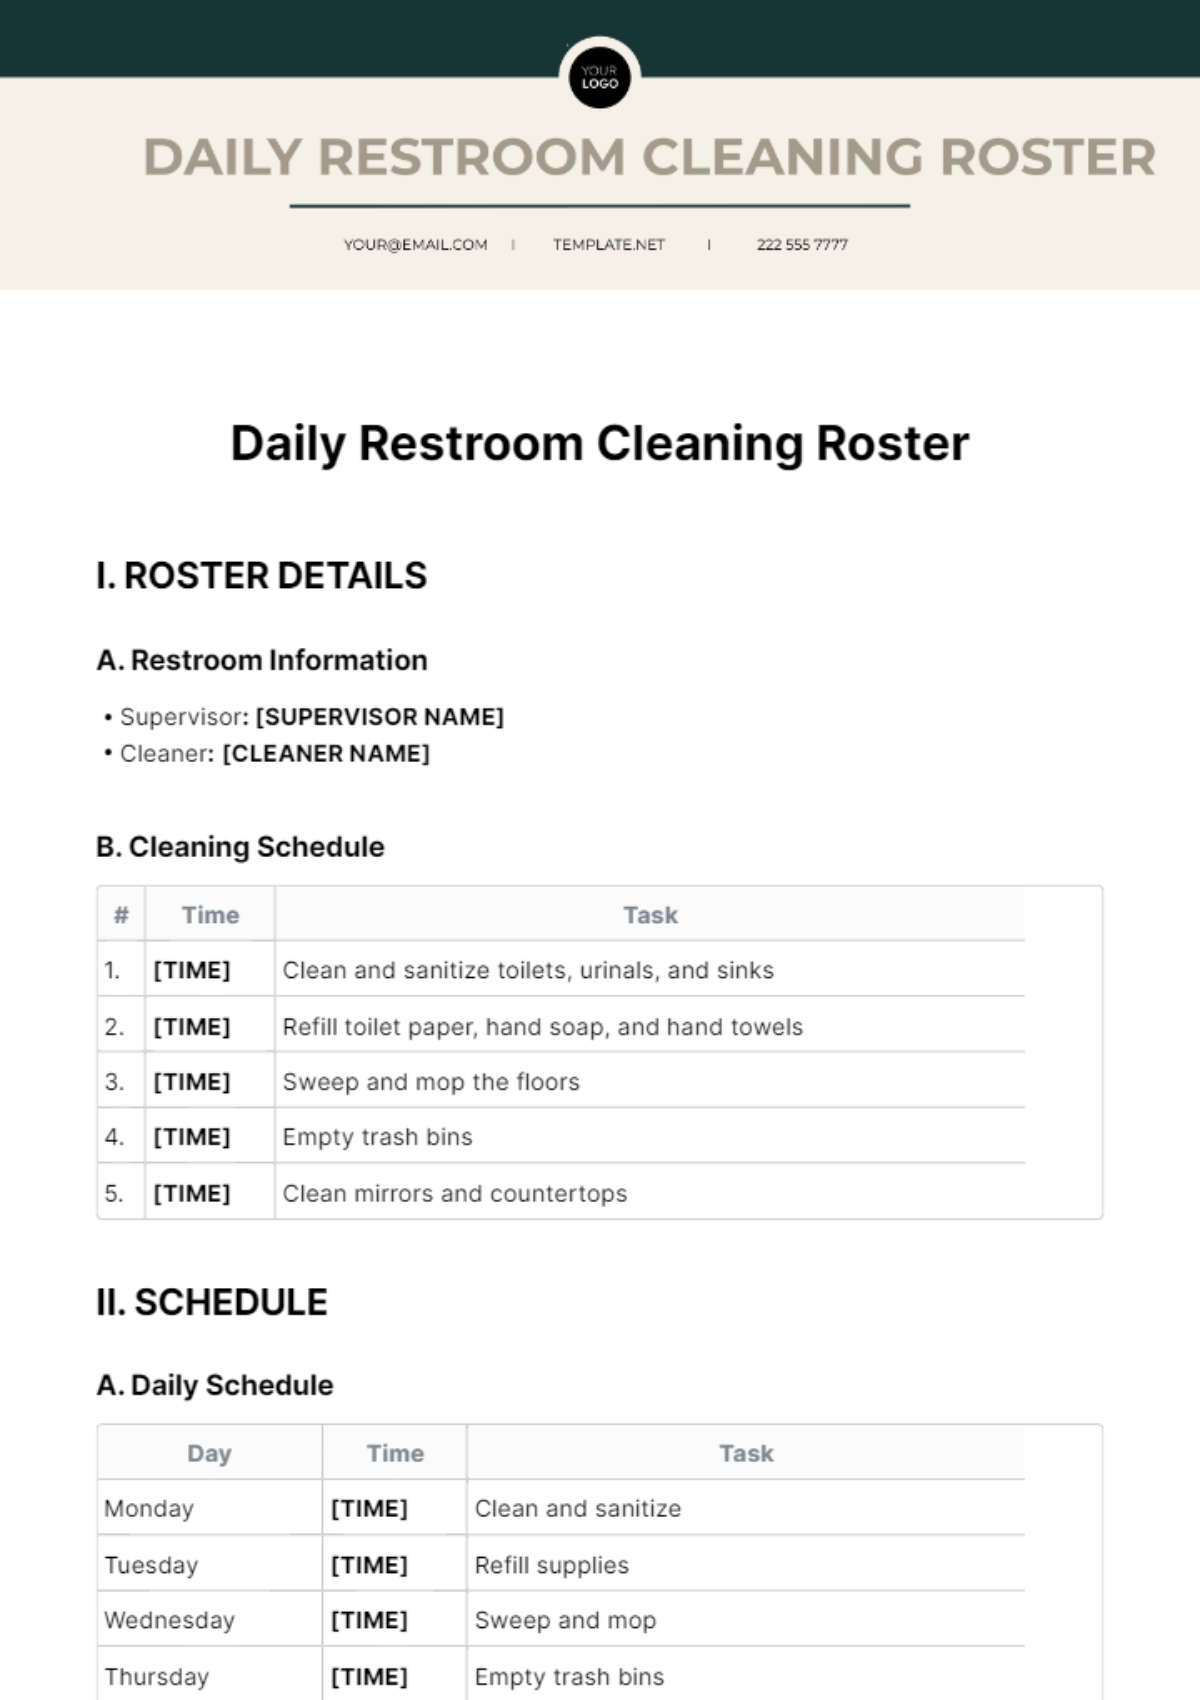 Daily Restroom Cleaning Roster Template